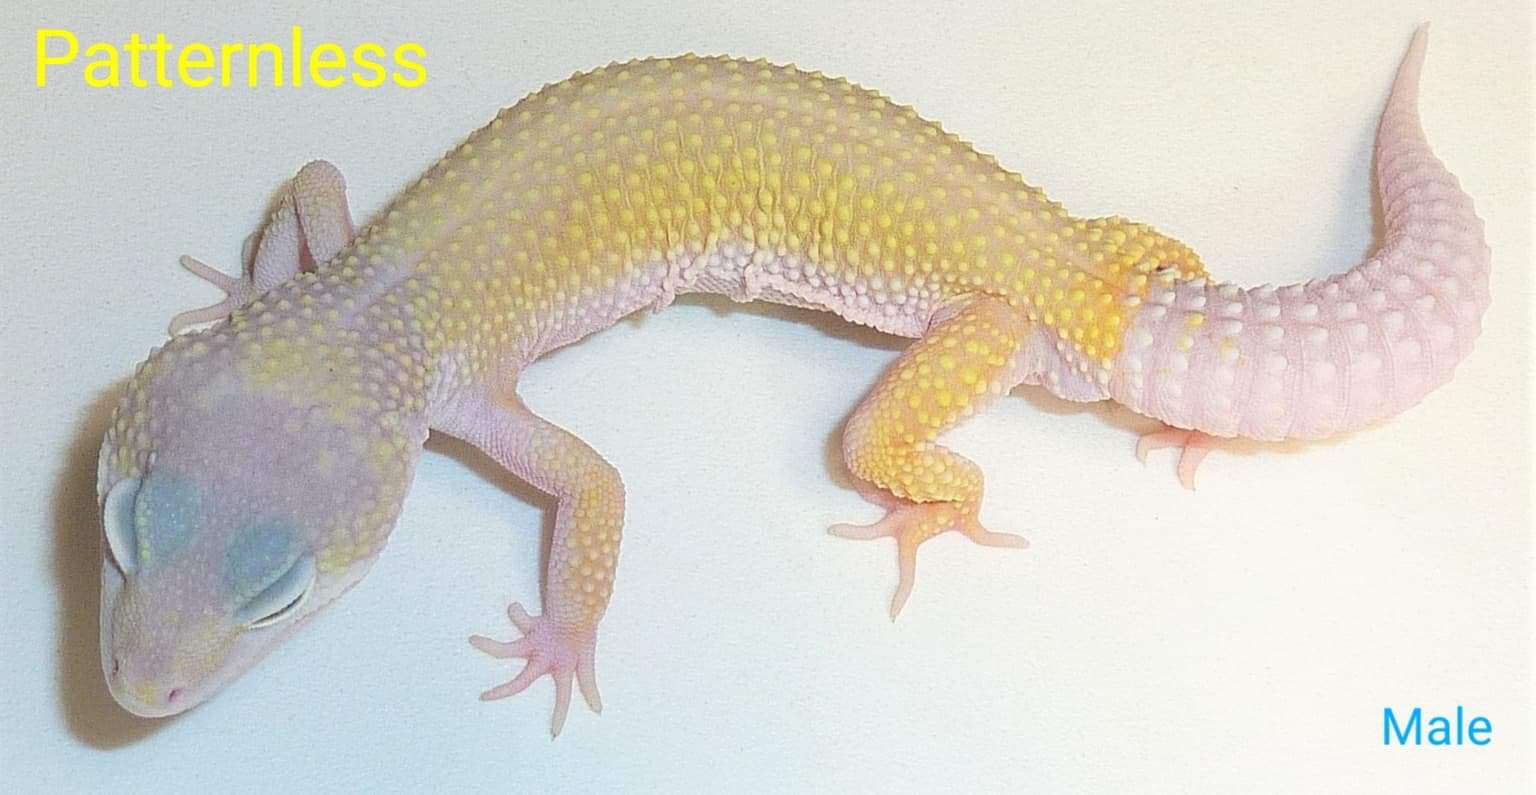 Murphy Patternless Leopard Gecko by HGH Reptiles